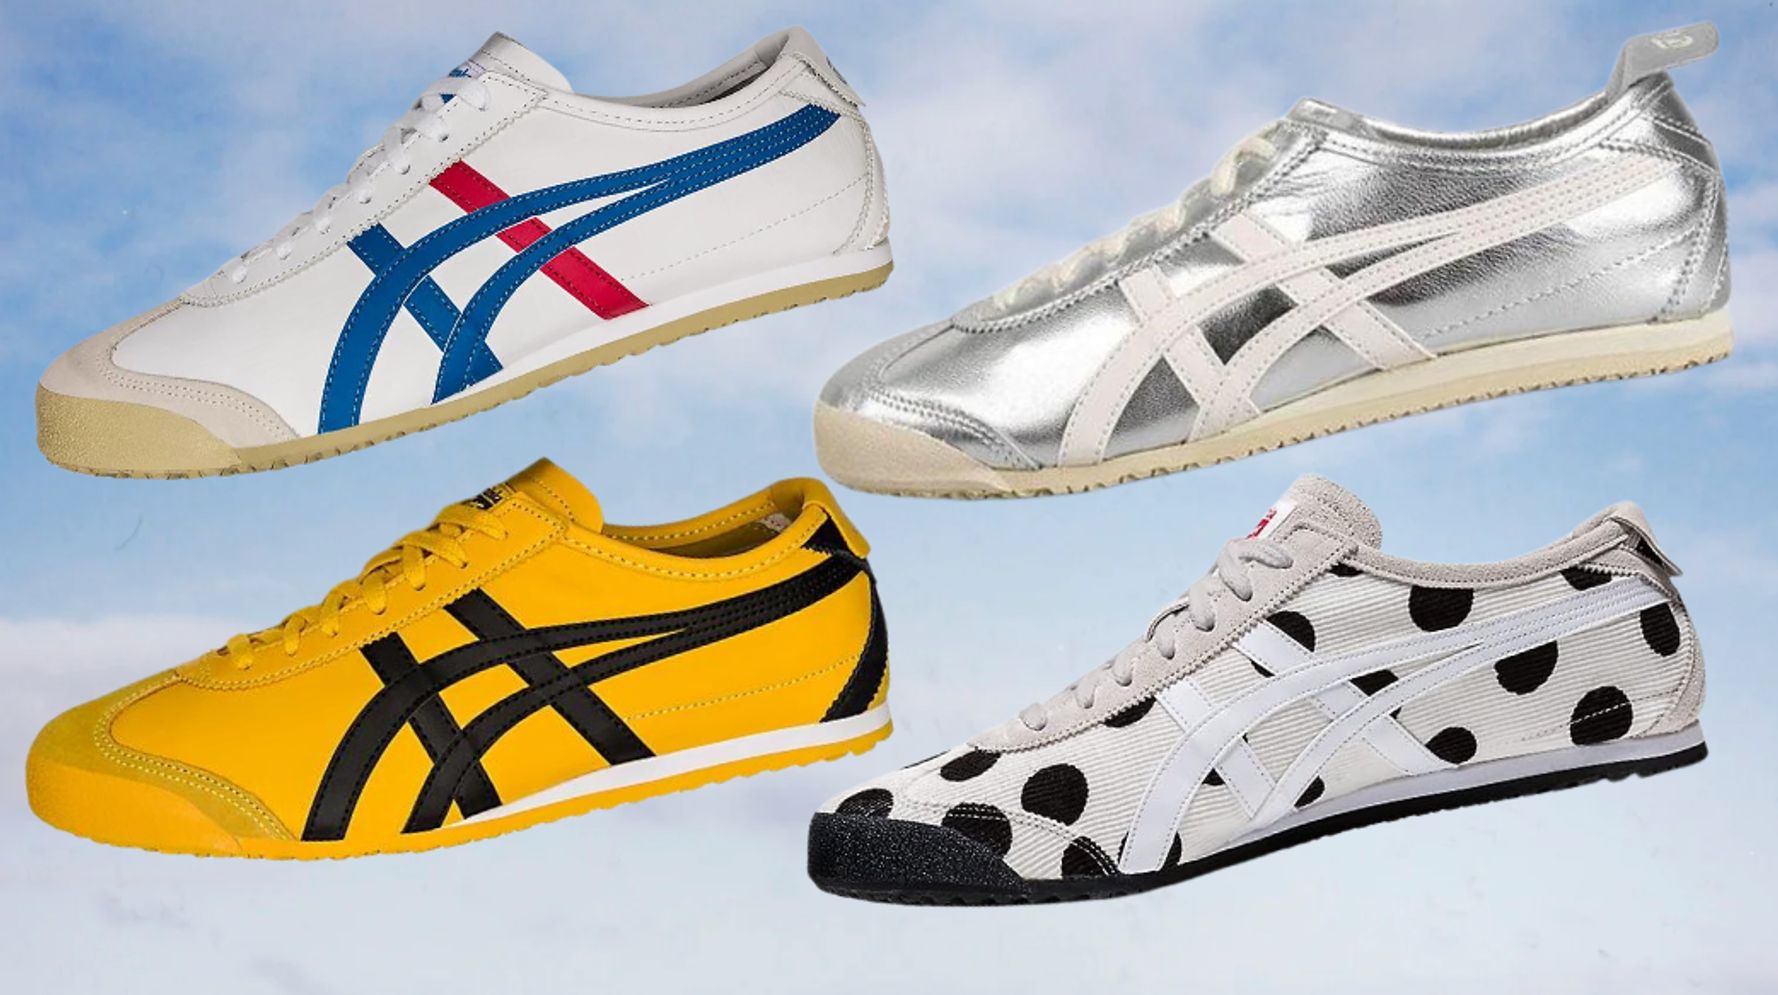 Onitsuka Tiger Mexico 66 Sneakers Are Having A Comeback